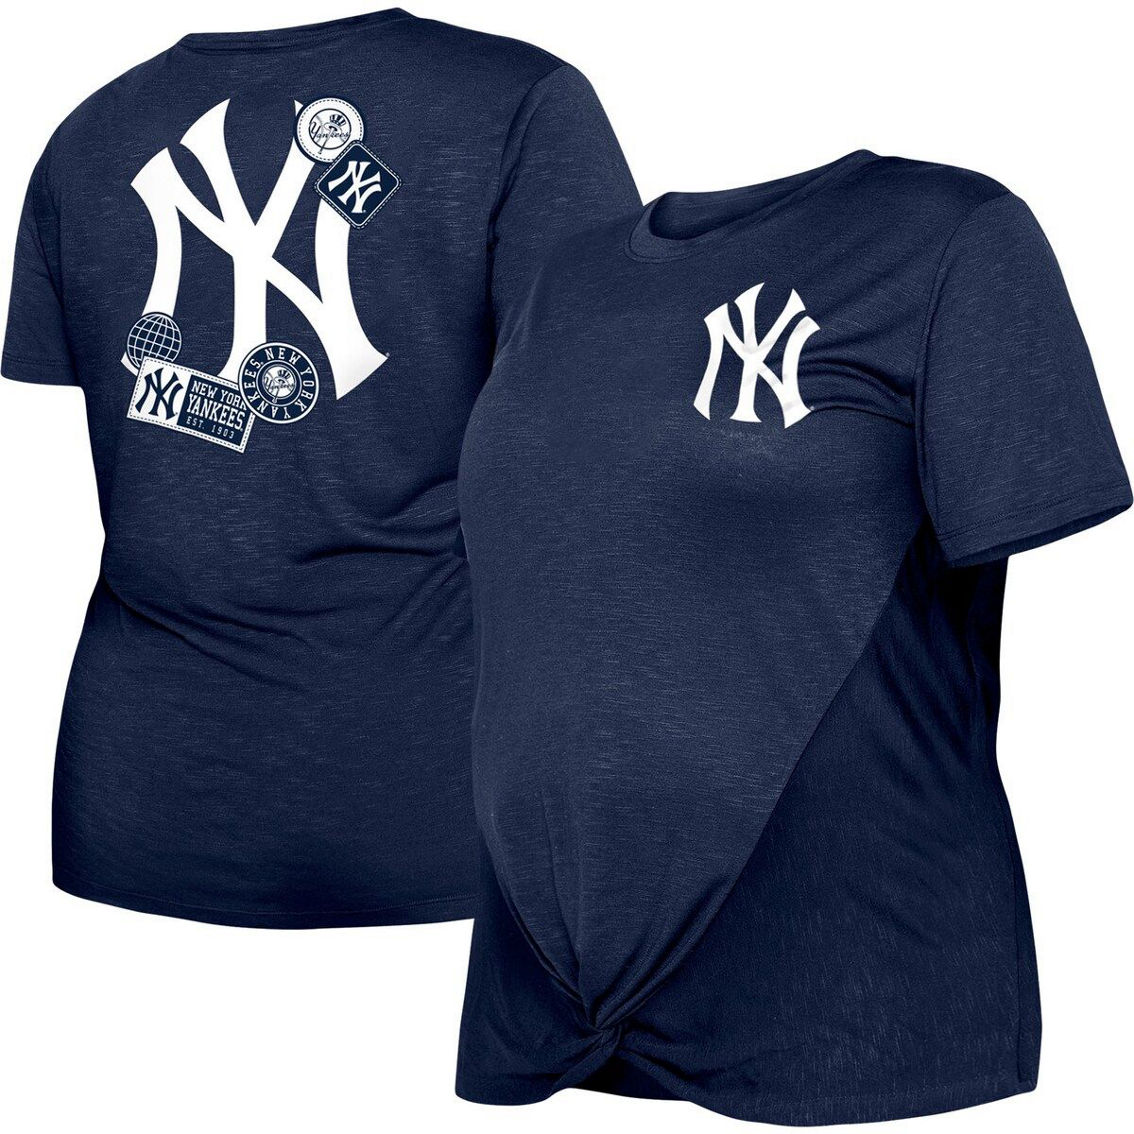 New Era Women's Navy New York Yankees Plus Size Two-Hit Front Knot T-Shirt - Image 2 of 4